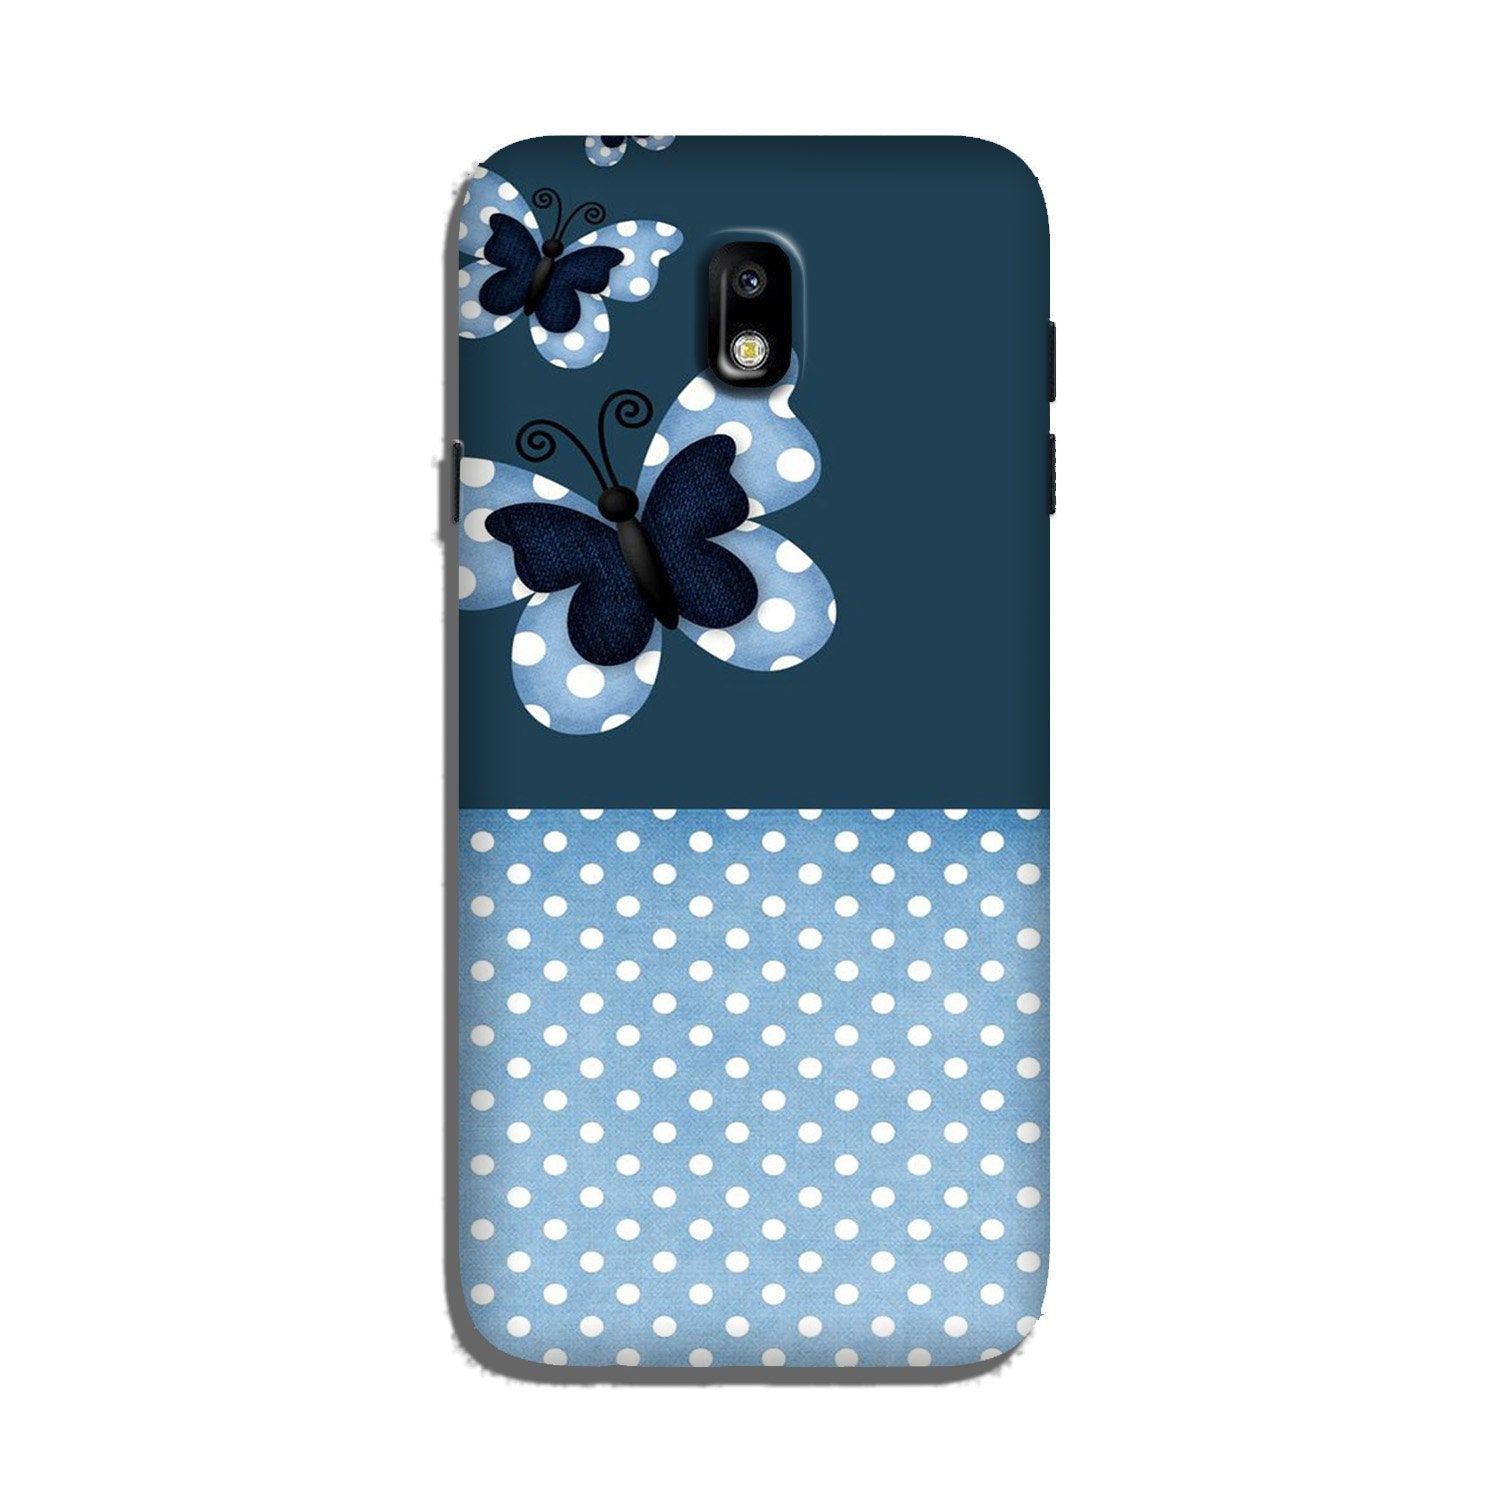 White dots Butterfly Case for Galaxy J3 Pro